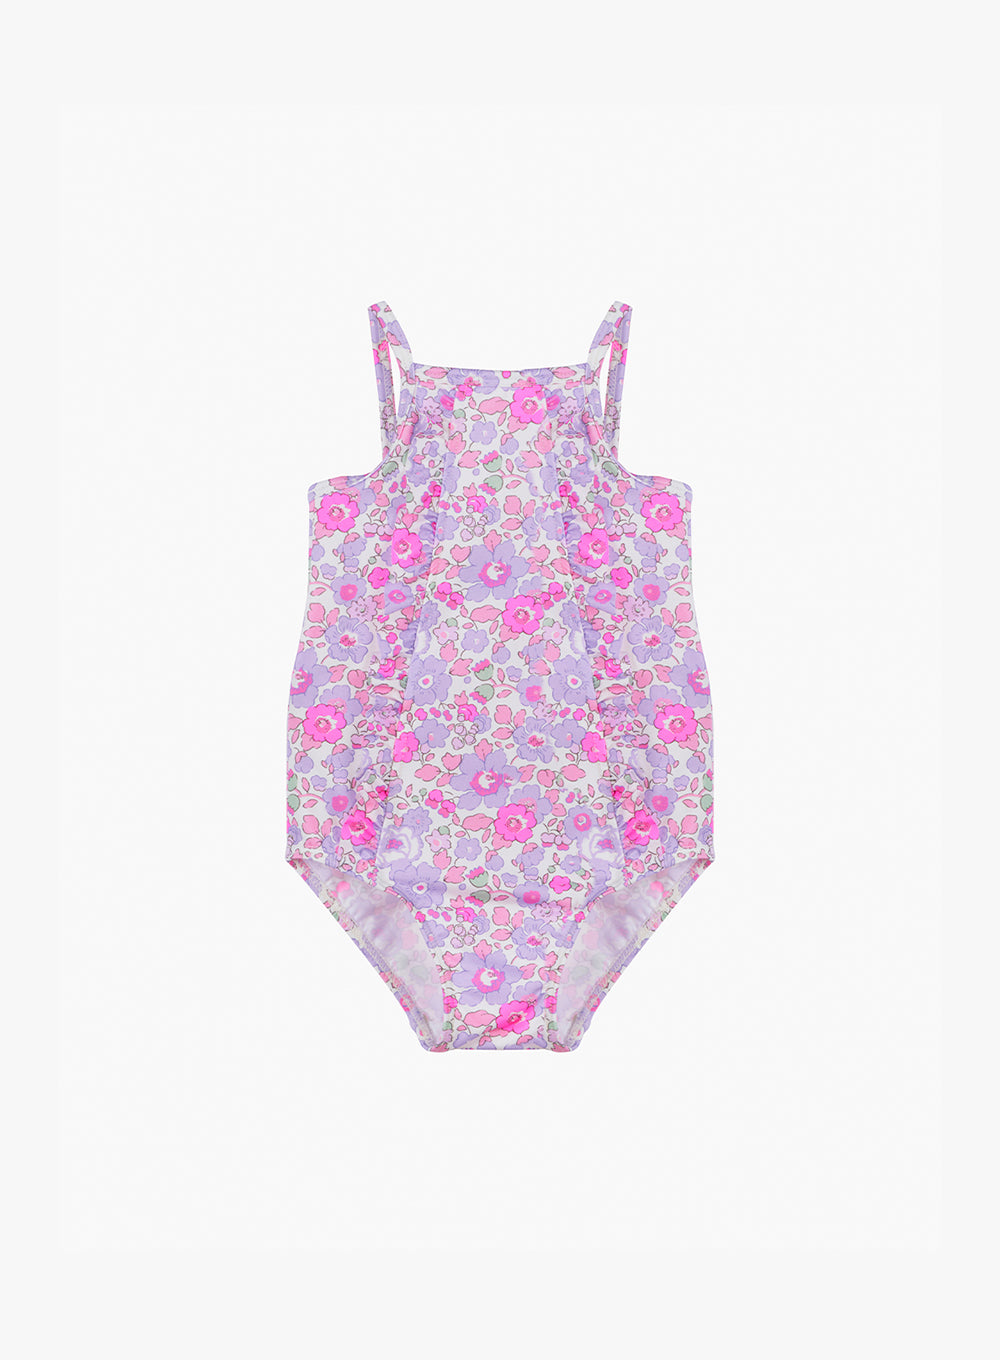 Baby Frill Swimsuit in Lilac Betsy